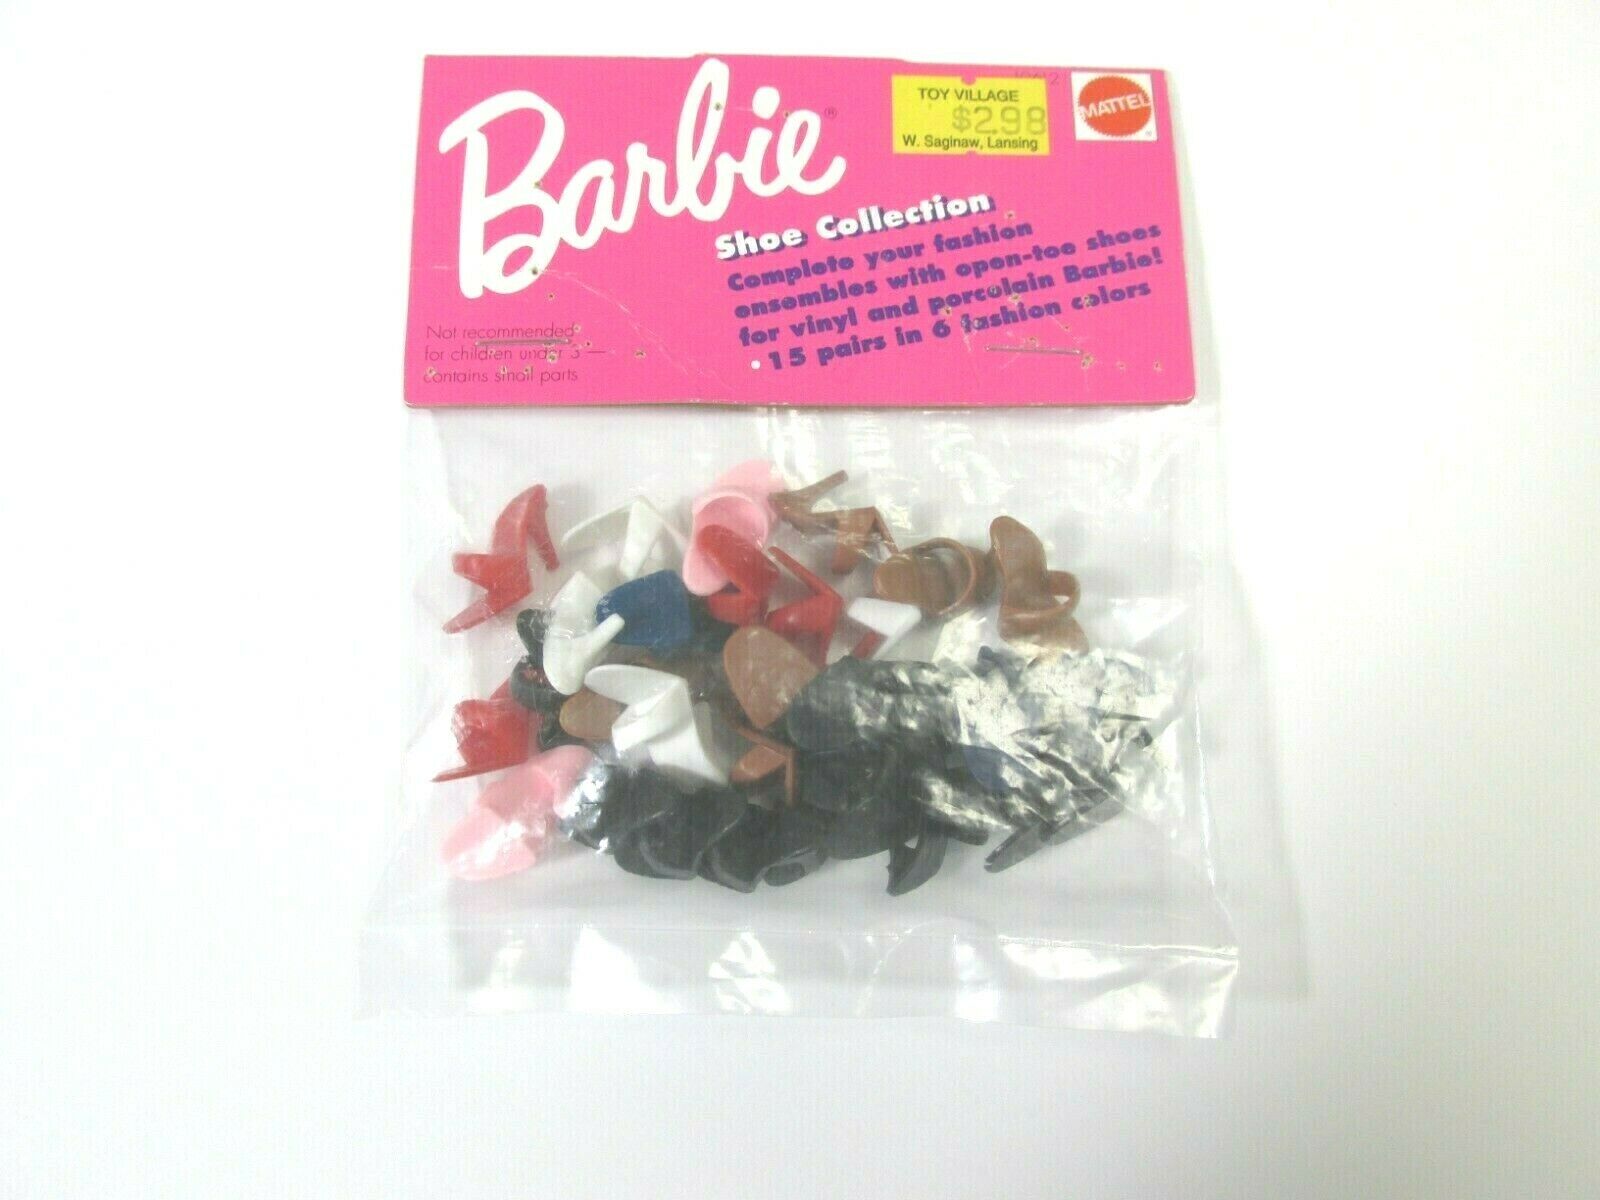 1993 Barbie Shoe Collection - 15 Pairs - #10612 - Opened Package - Still Mint